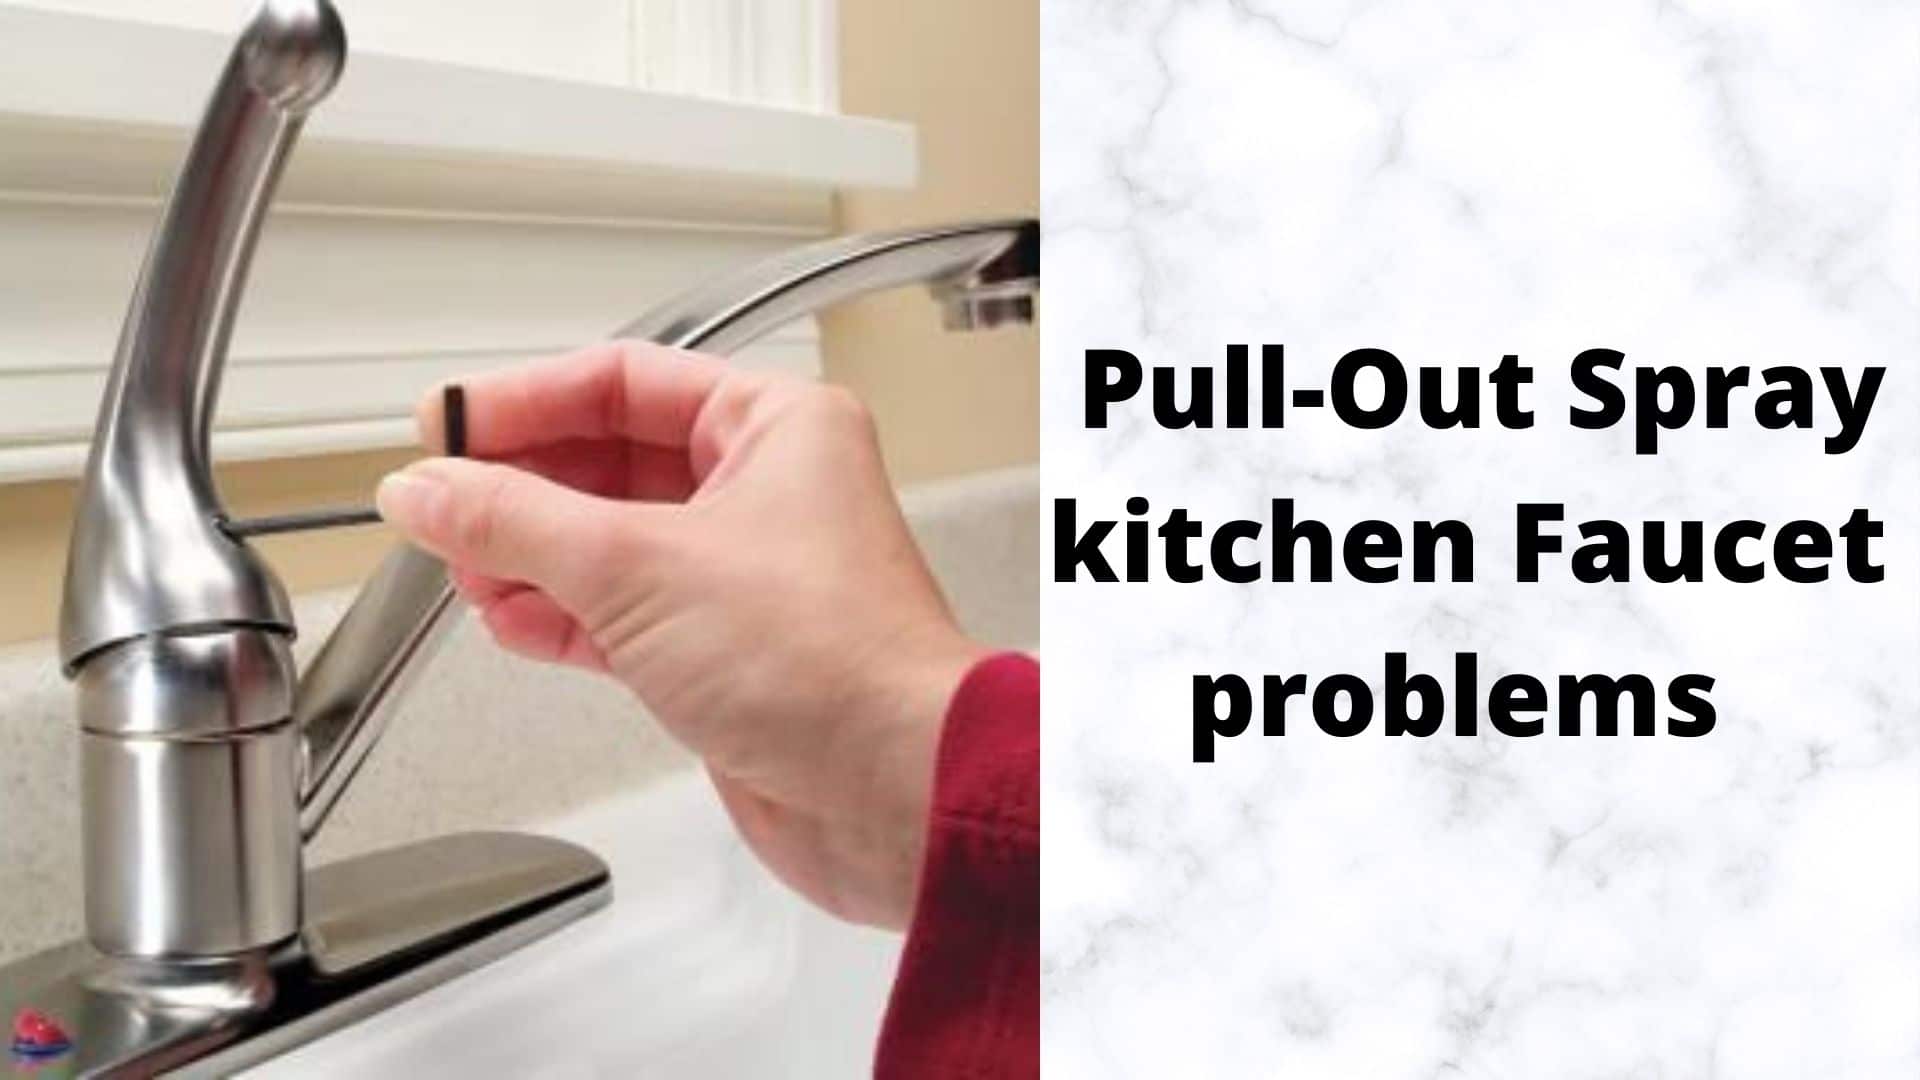 The most Common Pull-Out Spray kitchen Faucet problems and Solutions